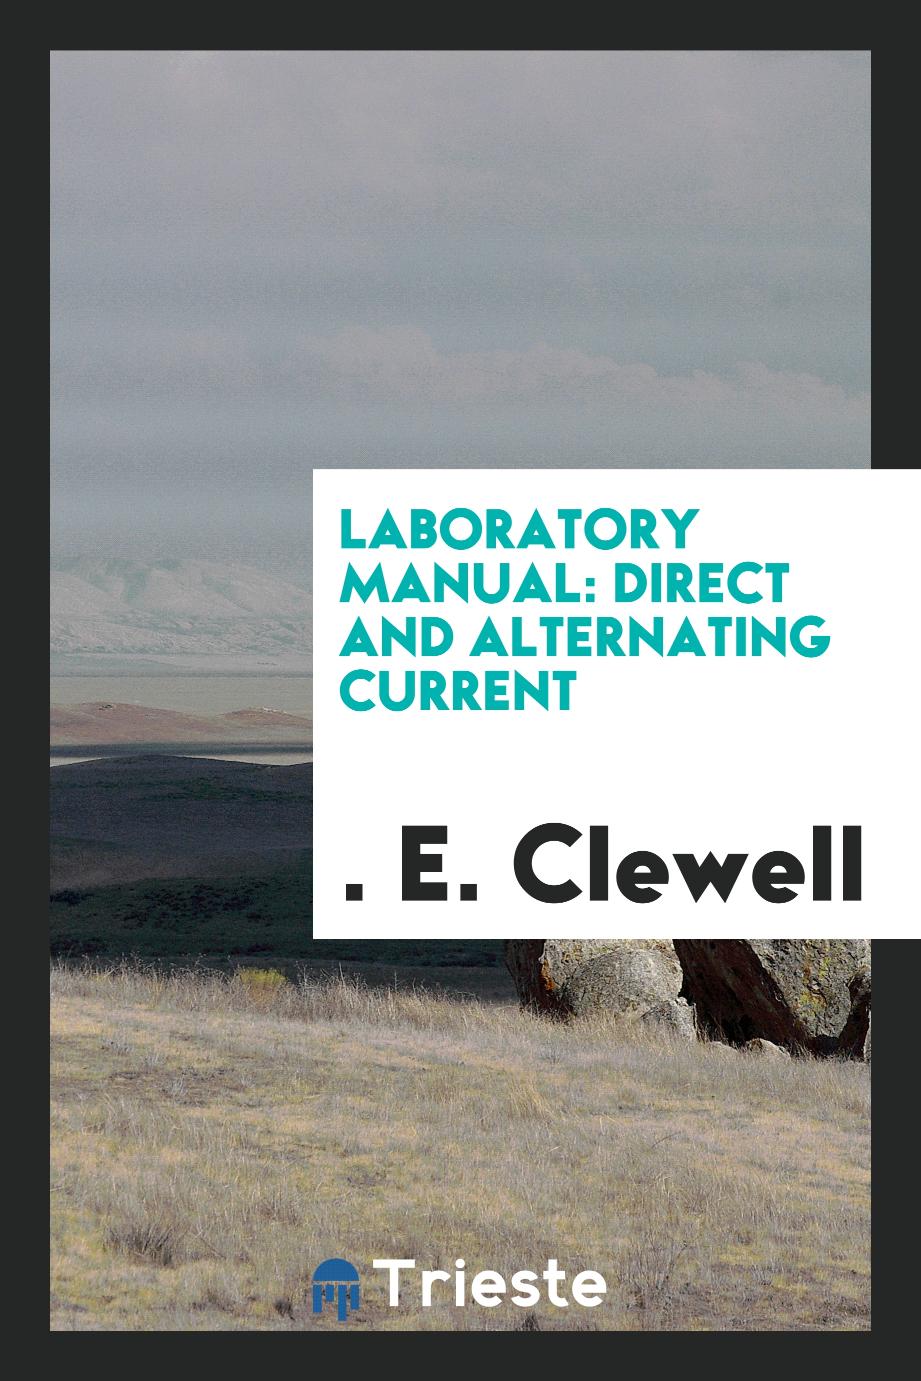 Laboratory Manual: Direct and Alternating Current